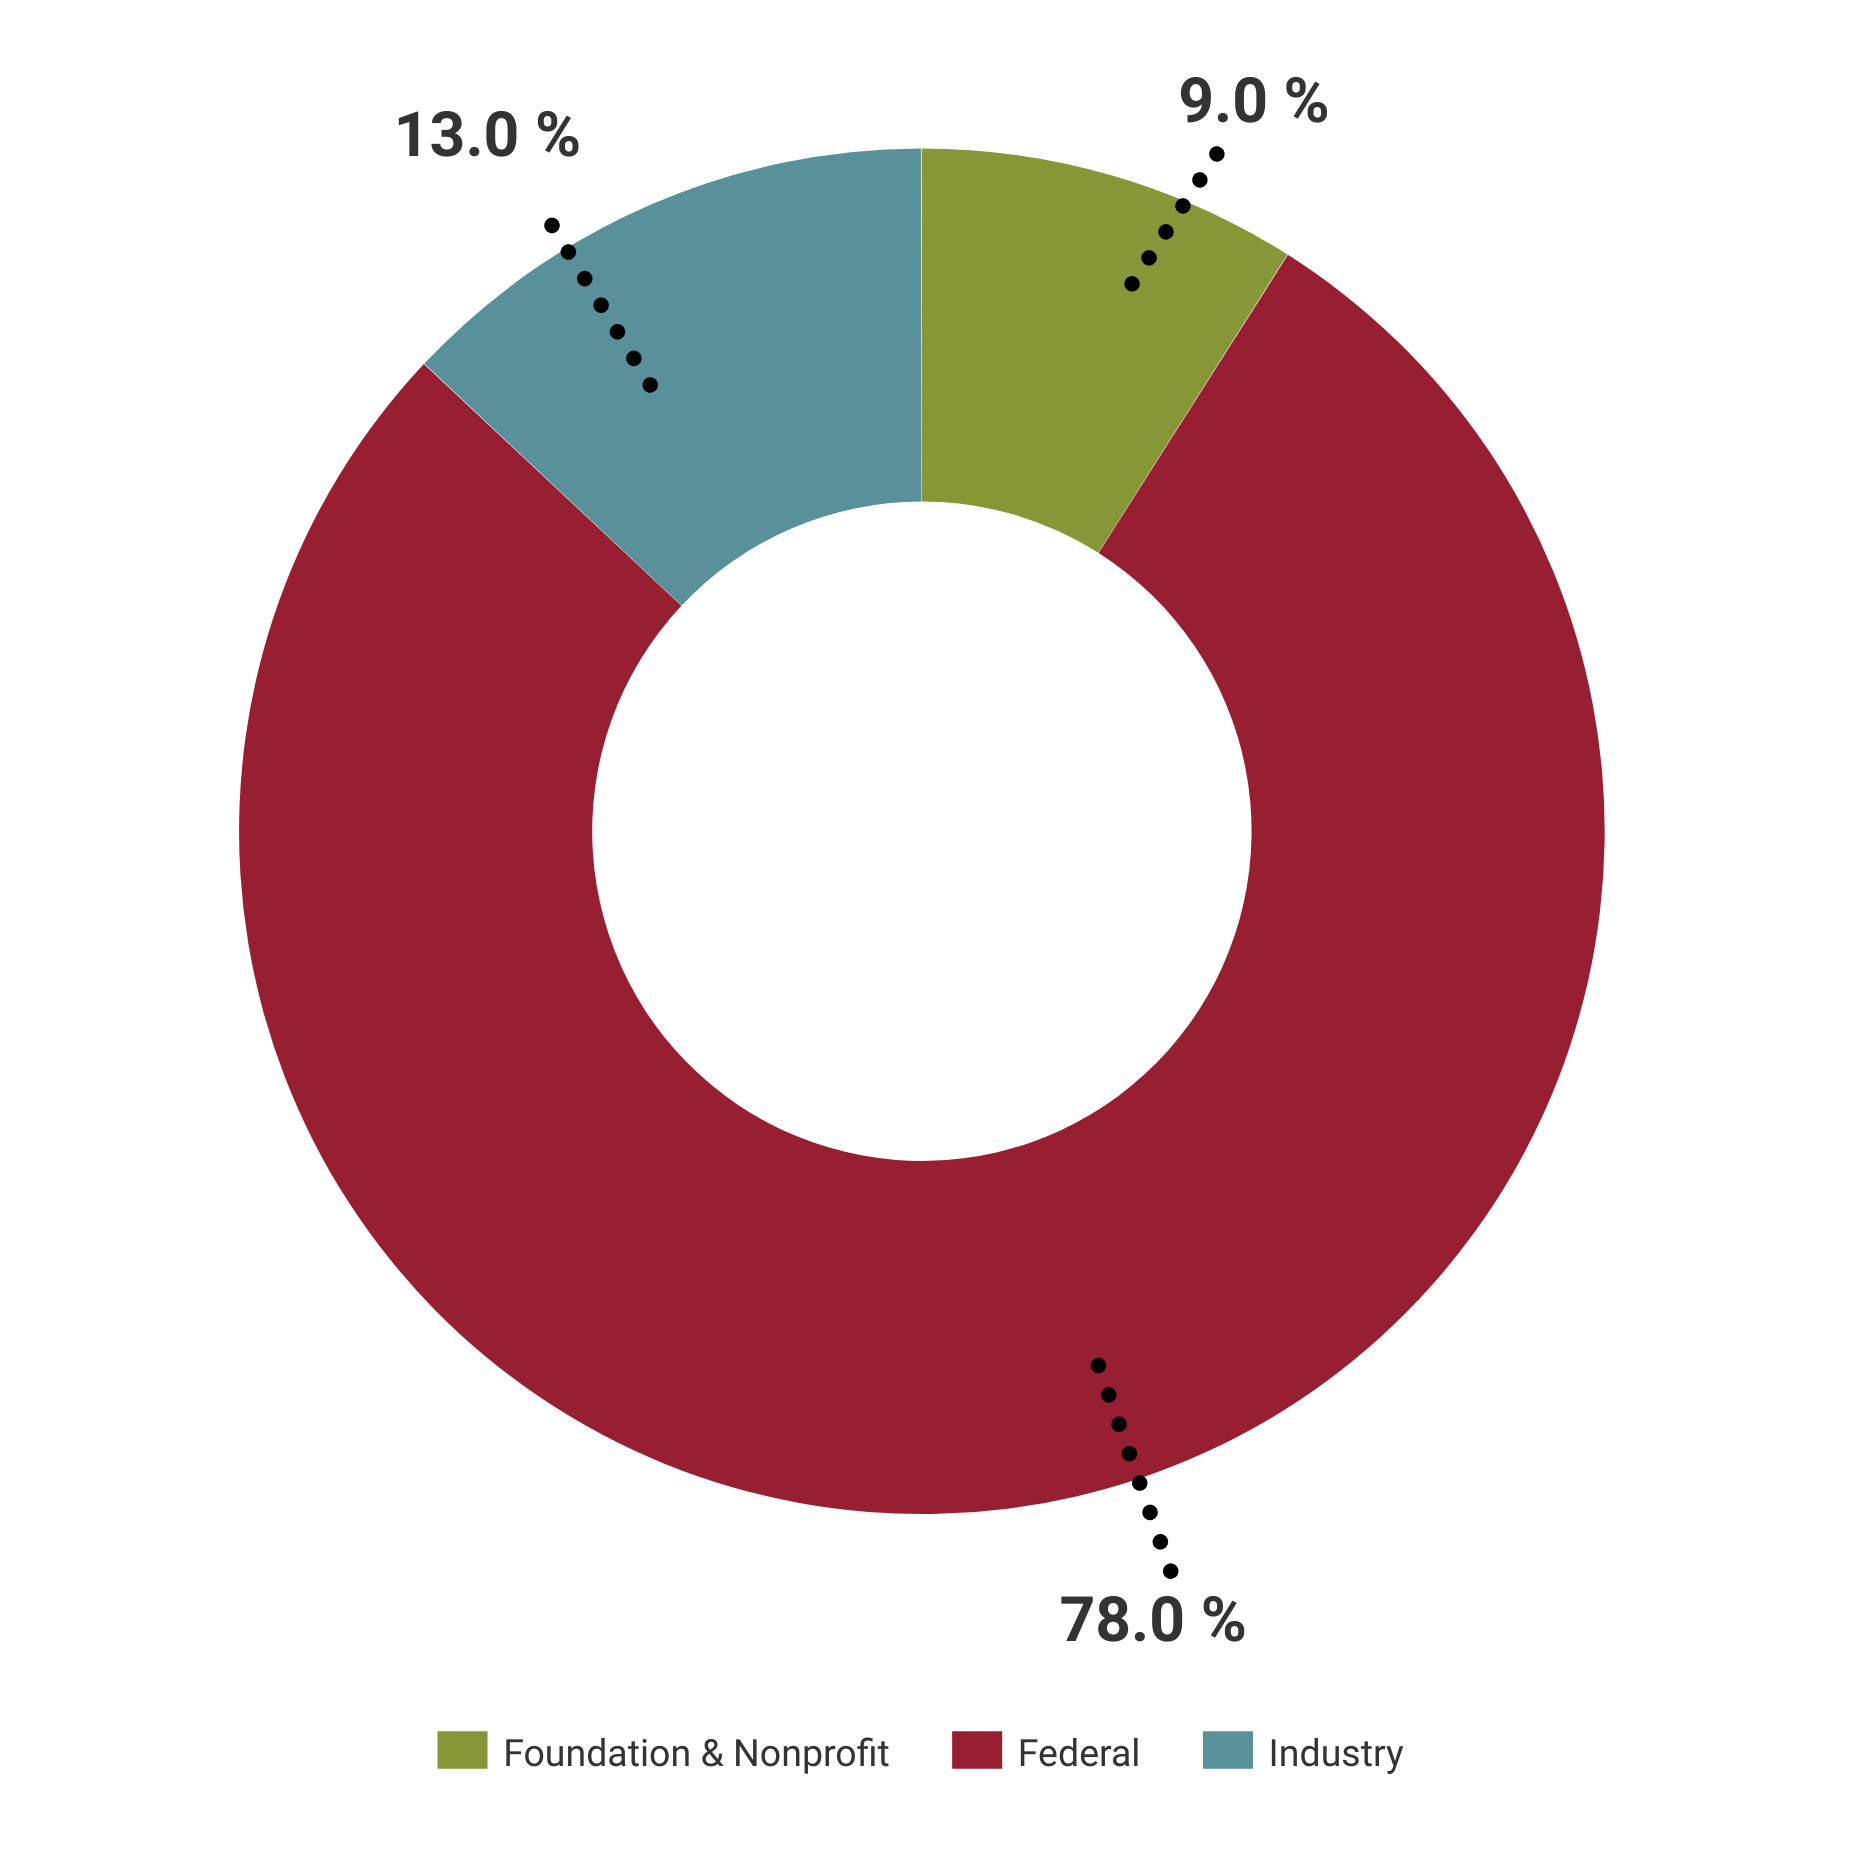 Donut chart illustrating source of funding: 9% foundation and nonprofit, 13% industry, 78% federal